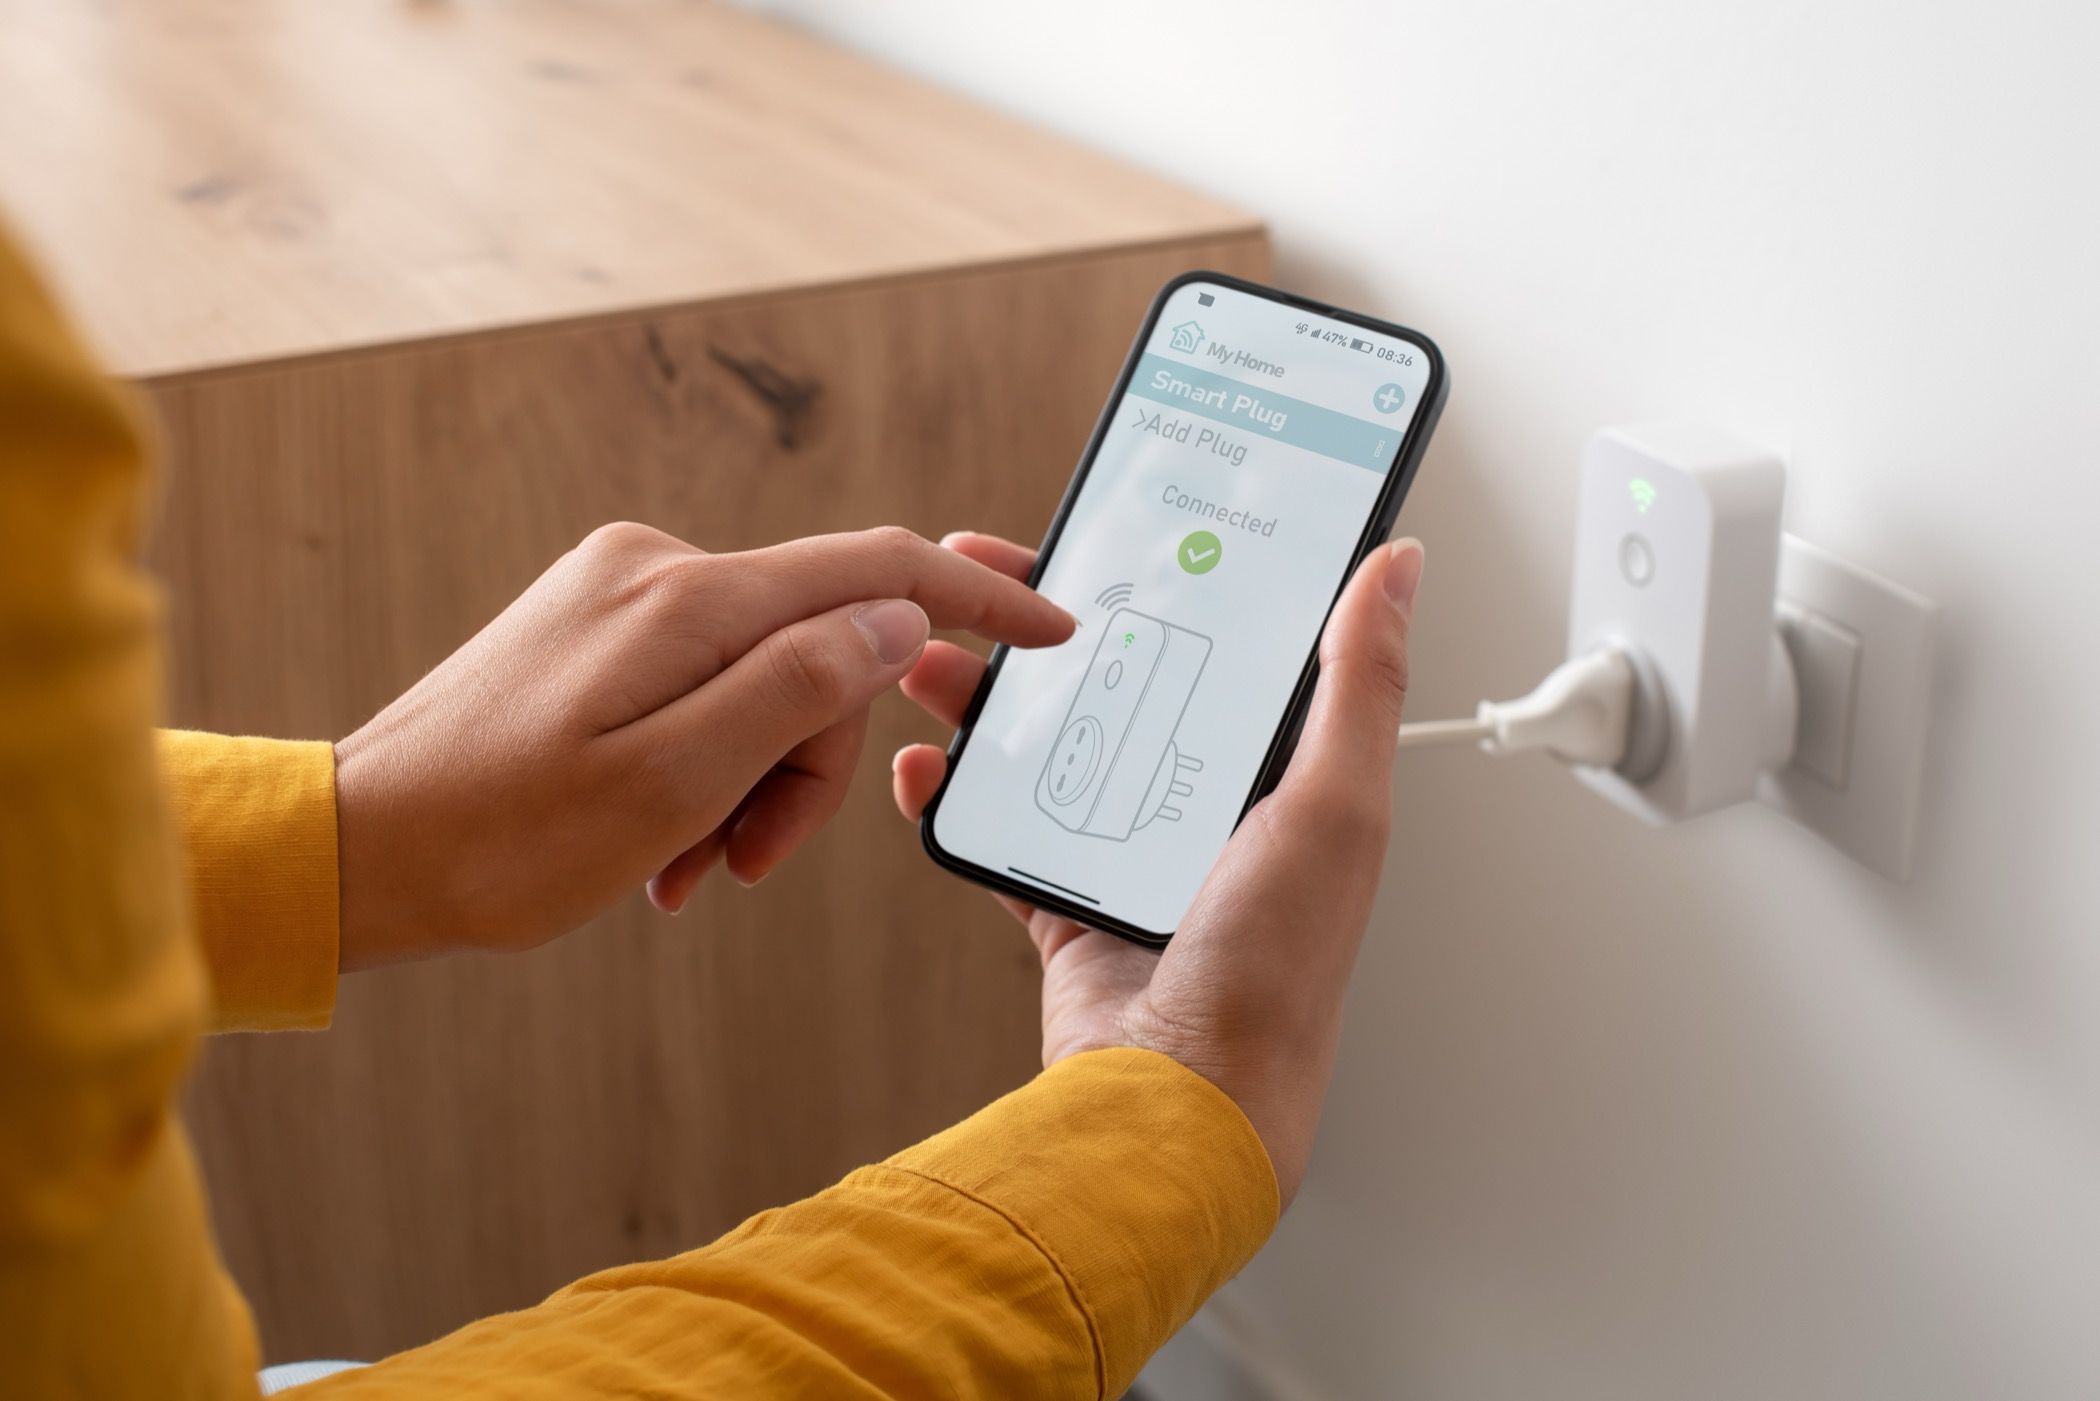 Woman setting up a smart plug at home using her smartphone.